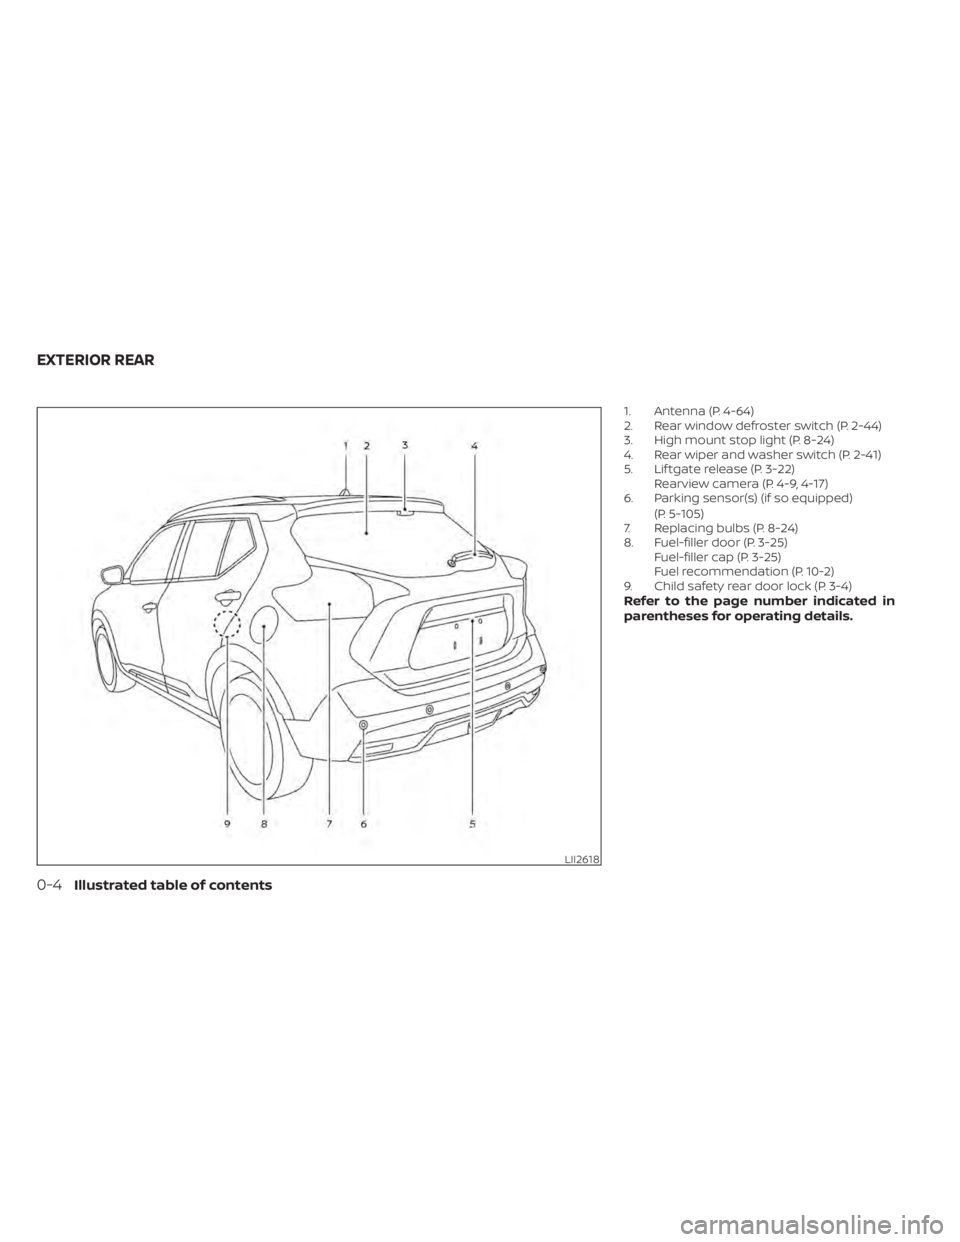 NISSAN KICKS 2022 User Guide 1. Antenna (P. 4-64)
2. Rear window defroster switch (P. 2-44)
3. High mount stop light (P. 8-24)
4. Rear wiper and washer switch (P. 2-41)
5. Lif tgate release (P. 3-22)Rearview camera (P. 4-9, 4-17)